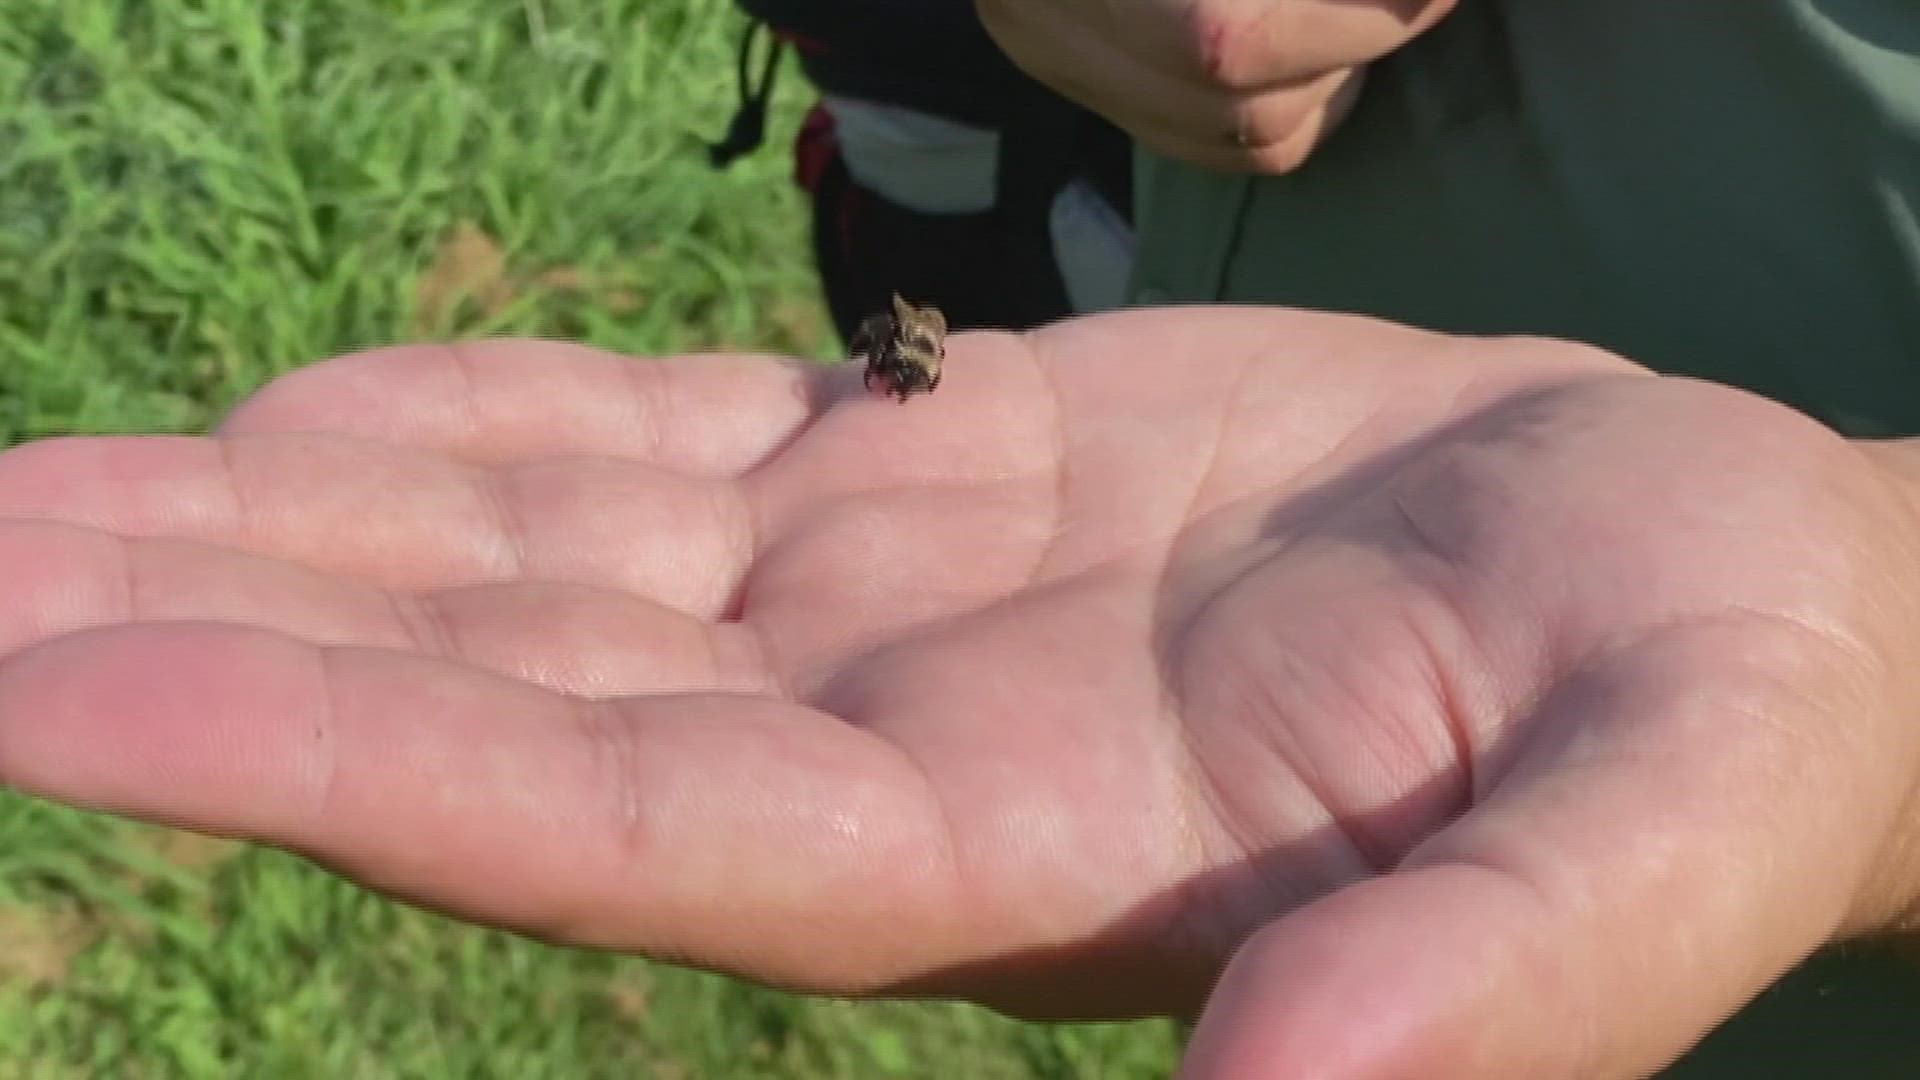 The Rusty Patch Bumble Bee was thought to be extinct in the Quad Cities region until they were spotted on zoo grounds in 2018. Since then, they've made a comeback.